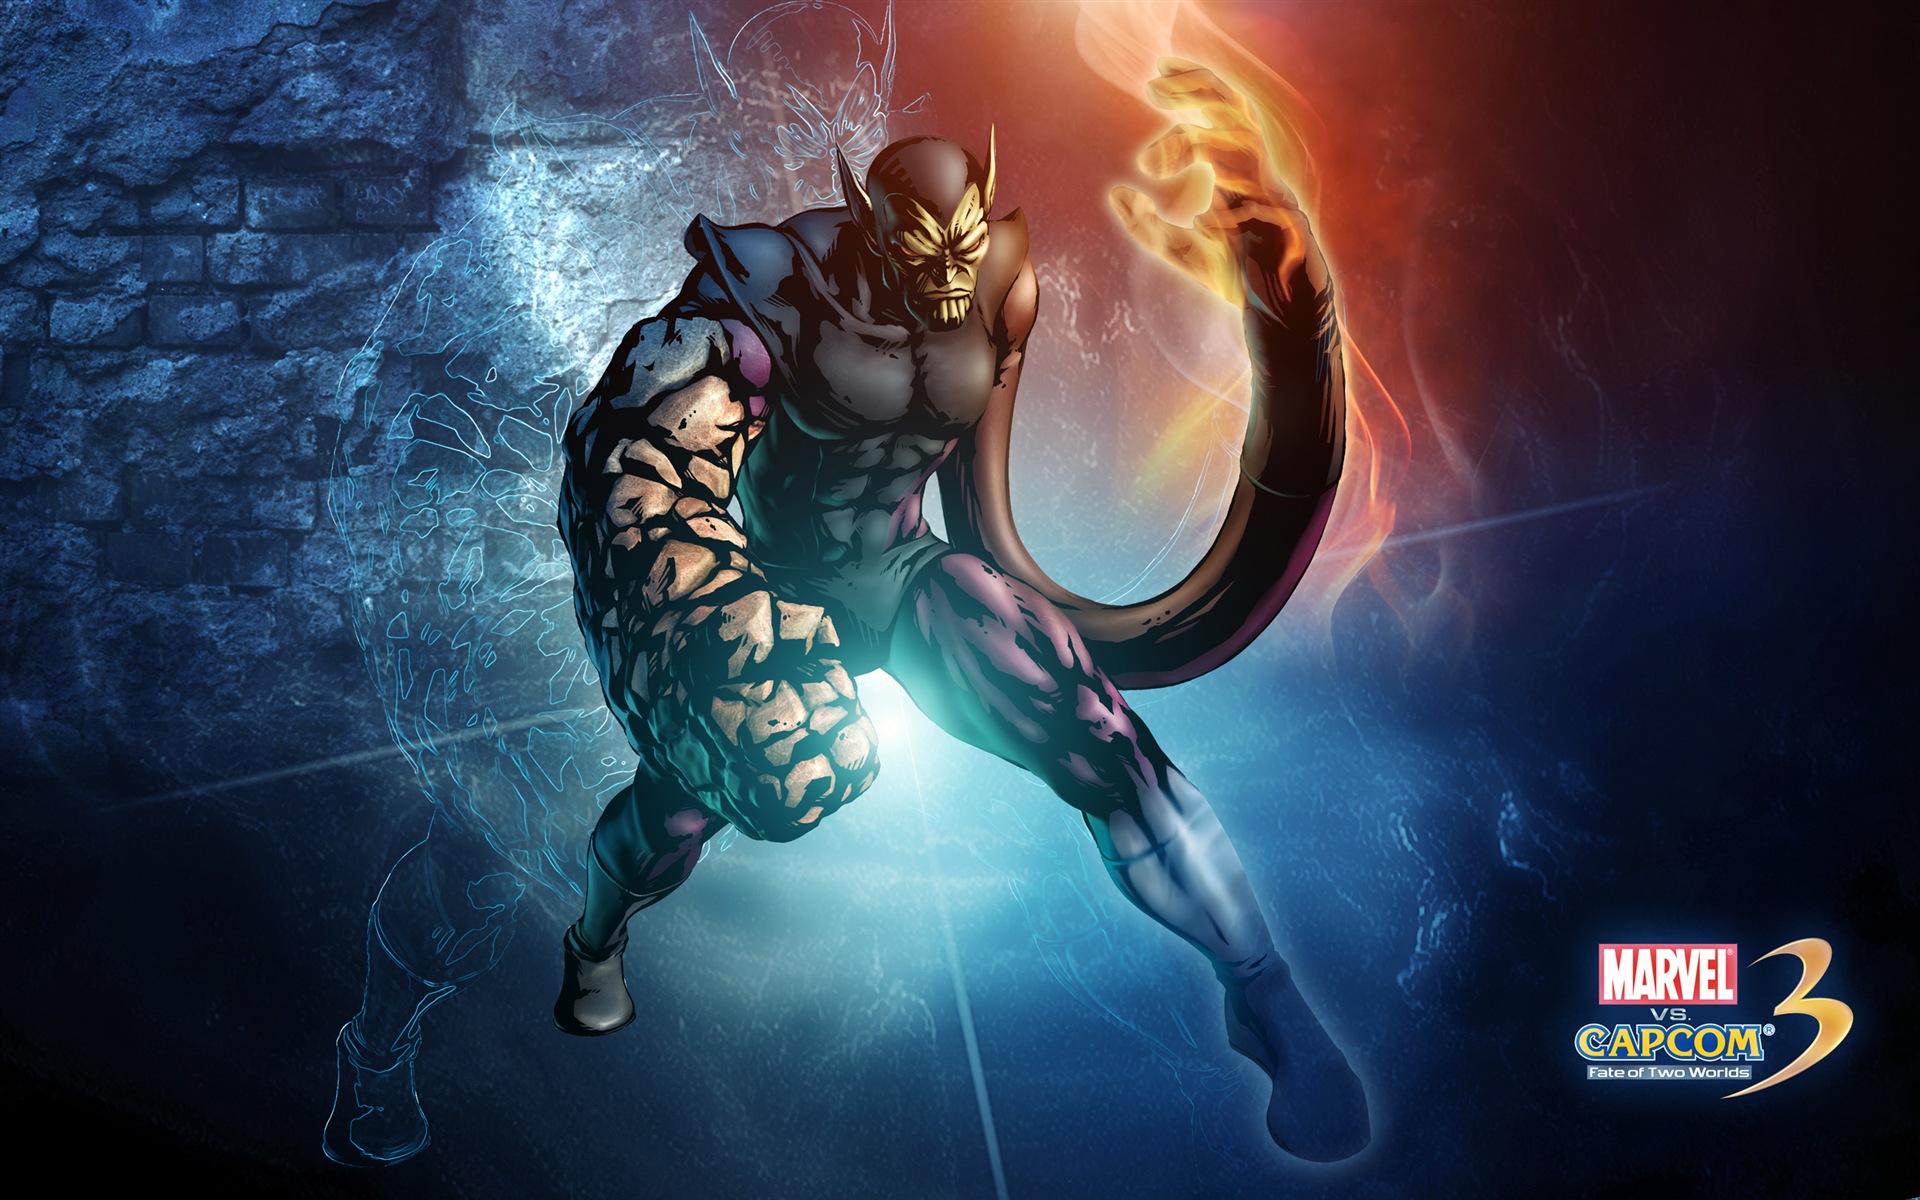 Marvel VS. Capcom 3: Fate of Two Worlds wallpapers HD herní #24 - 1920x1200